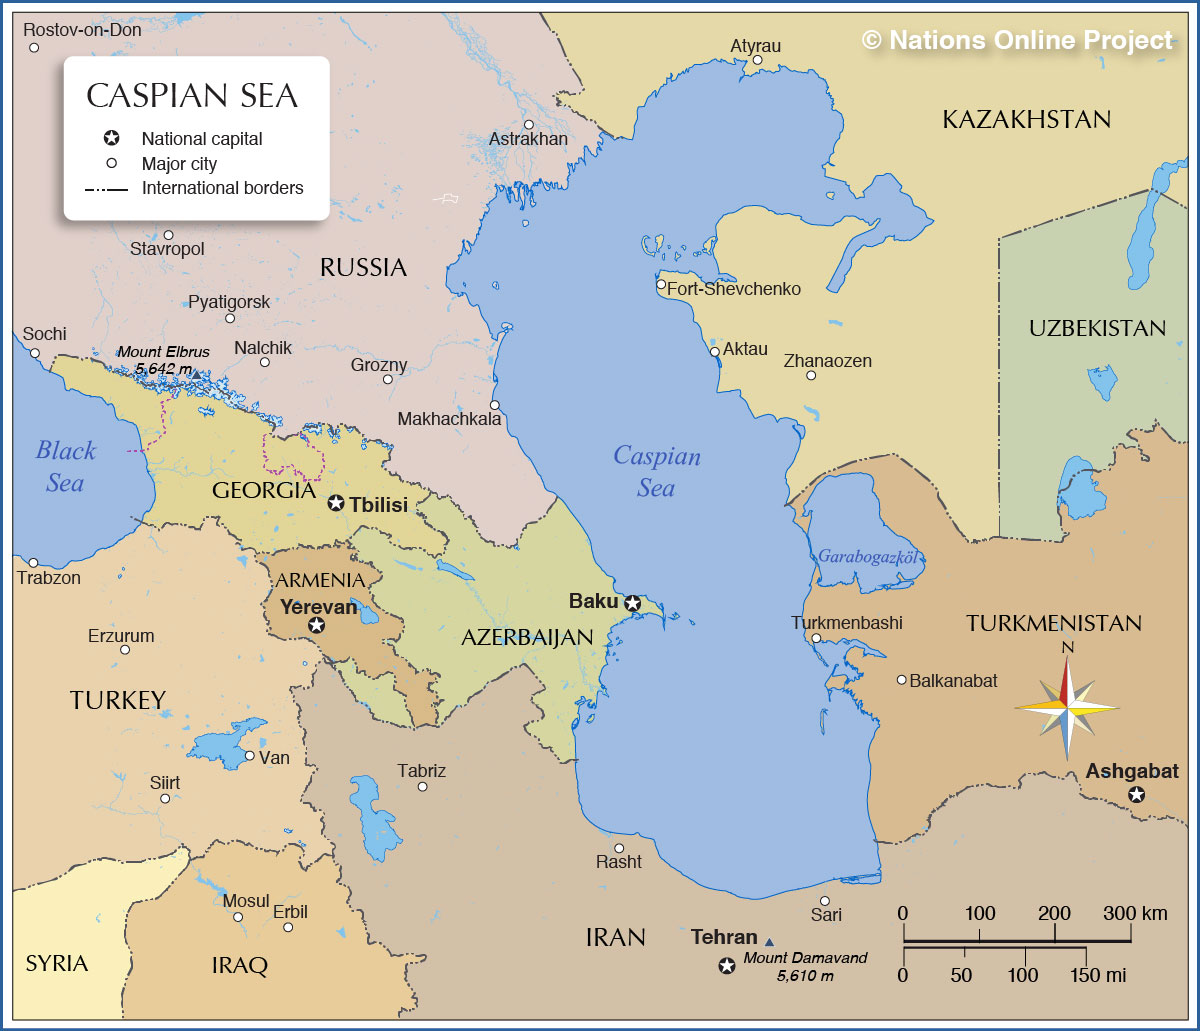 caspian sea location on world map Map Of The Caspian Sea Nations Online Project caspian sea location on world map